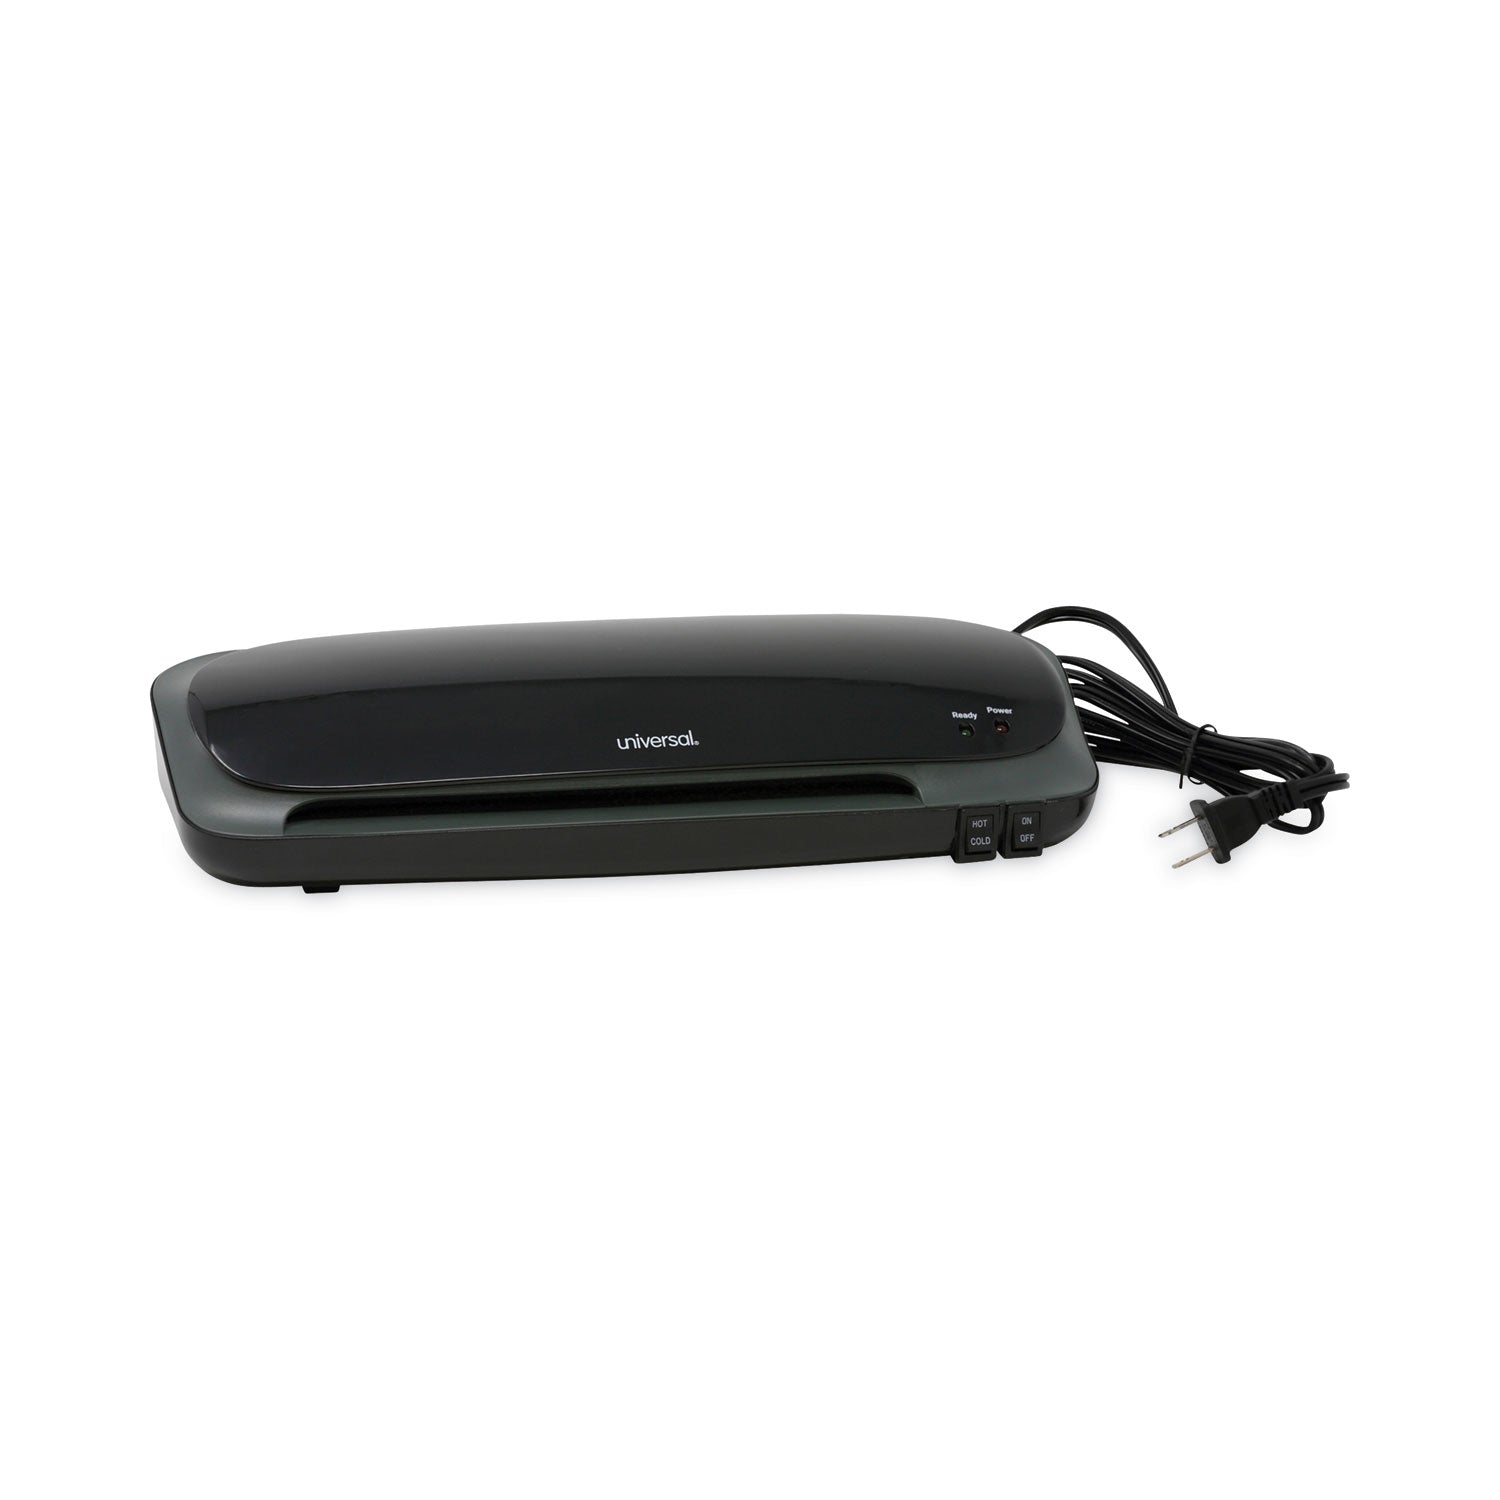 deluxe-desktop-laminator-two-rollers-9-max-document-width-5-mil-max-document-thickness_unv84600 - 1